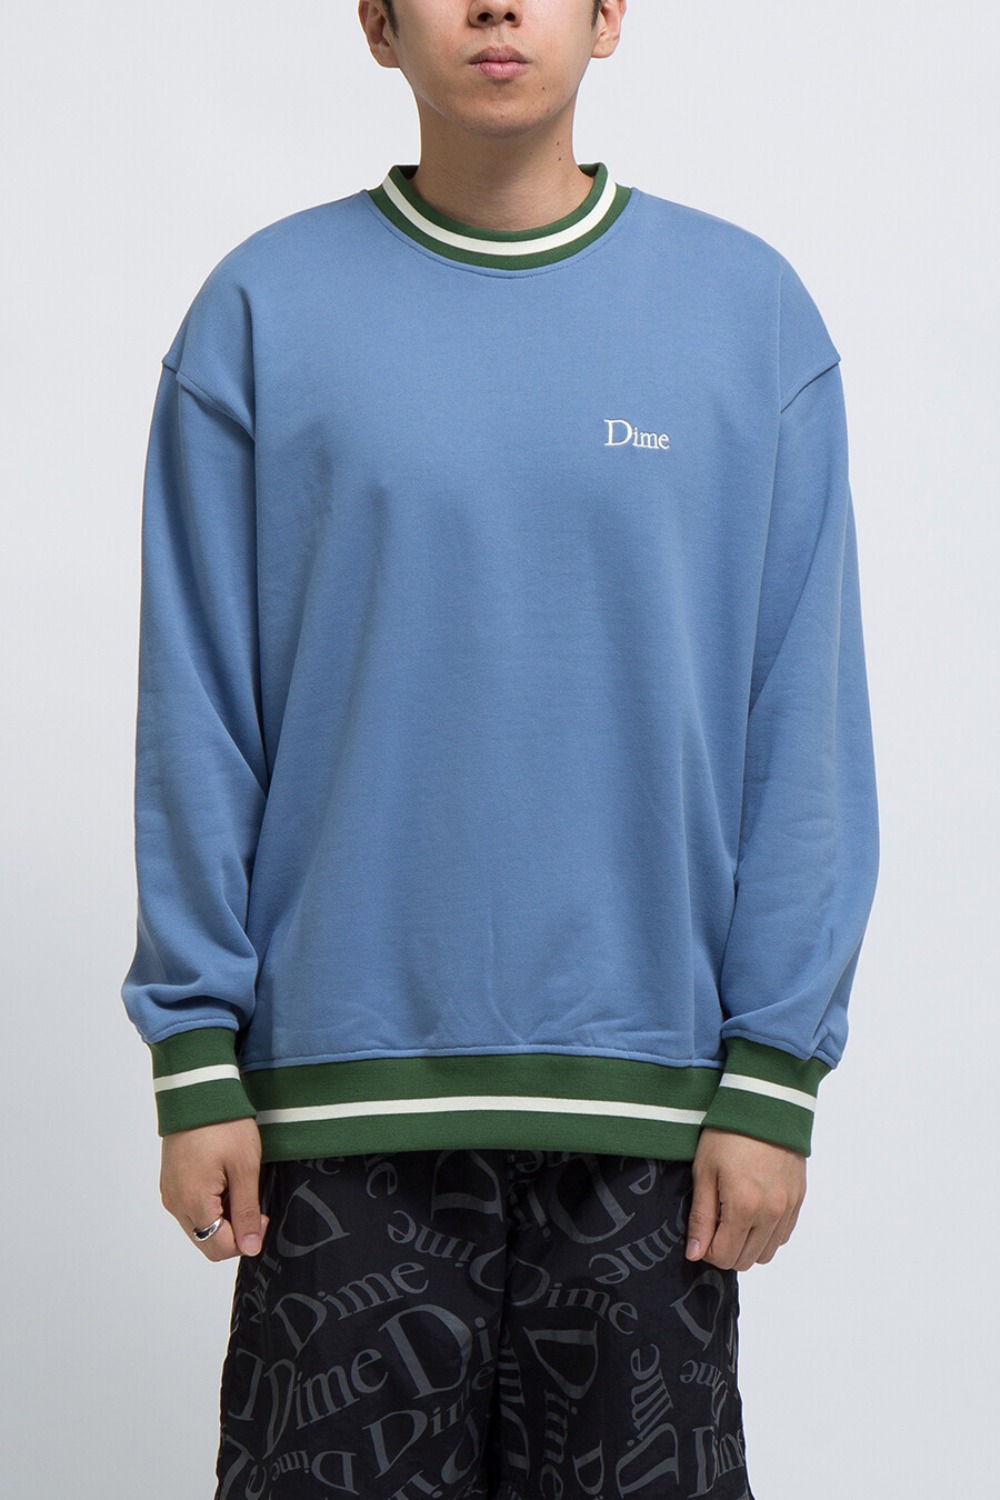 DIME CLASSIC FRENCH TERRY CREWNECK BLUE